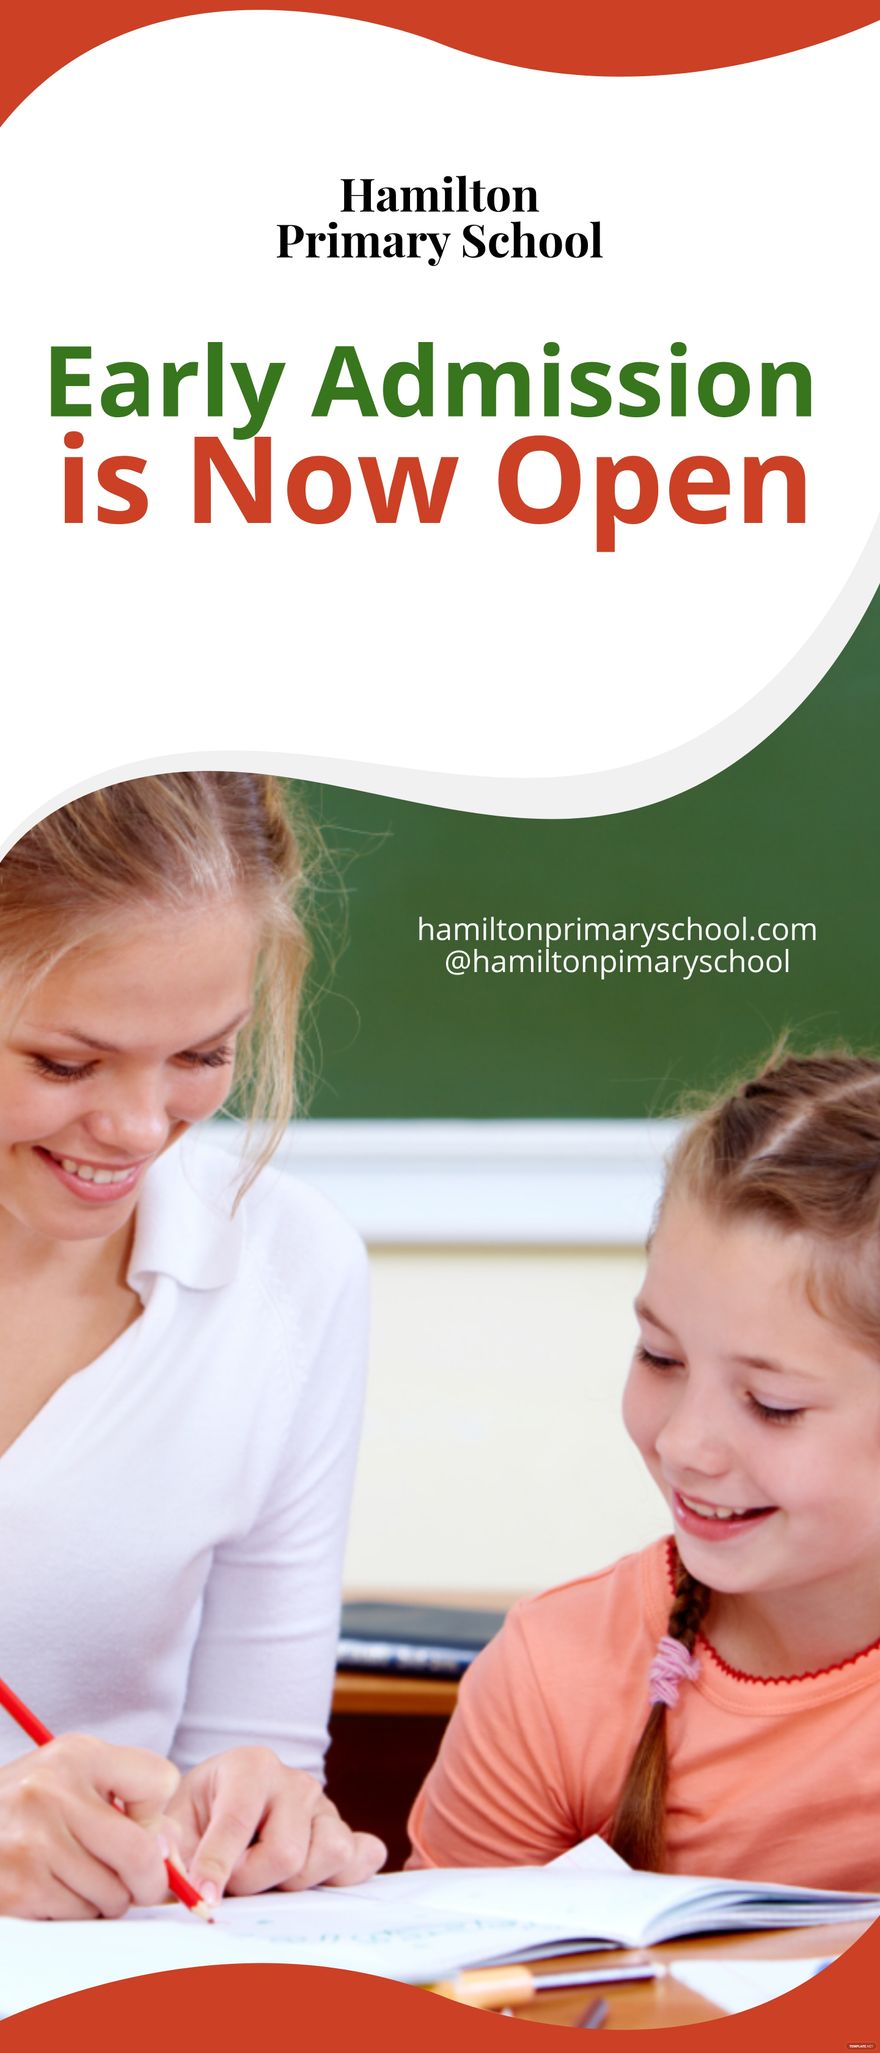 Junior School Rollup Banner Template in Word, Google Docs, Apple Pages, Publisher